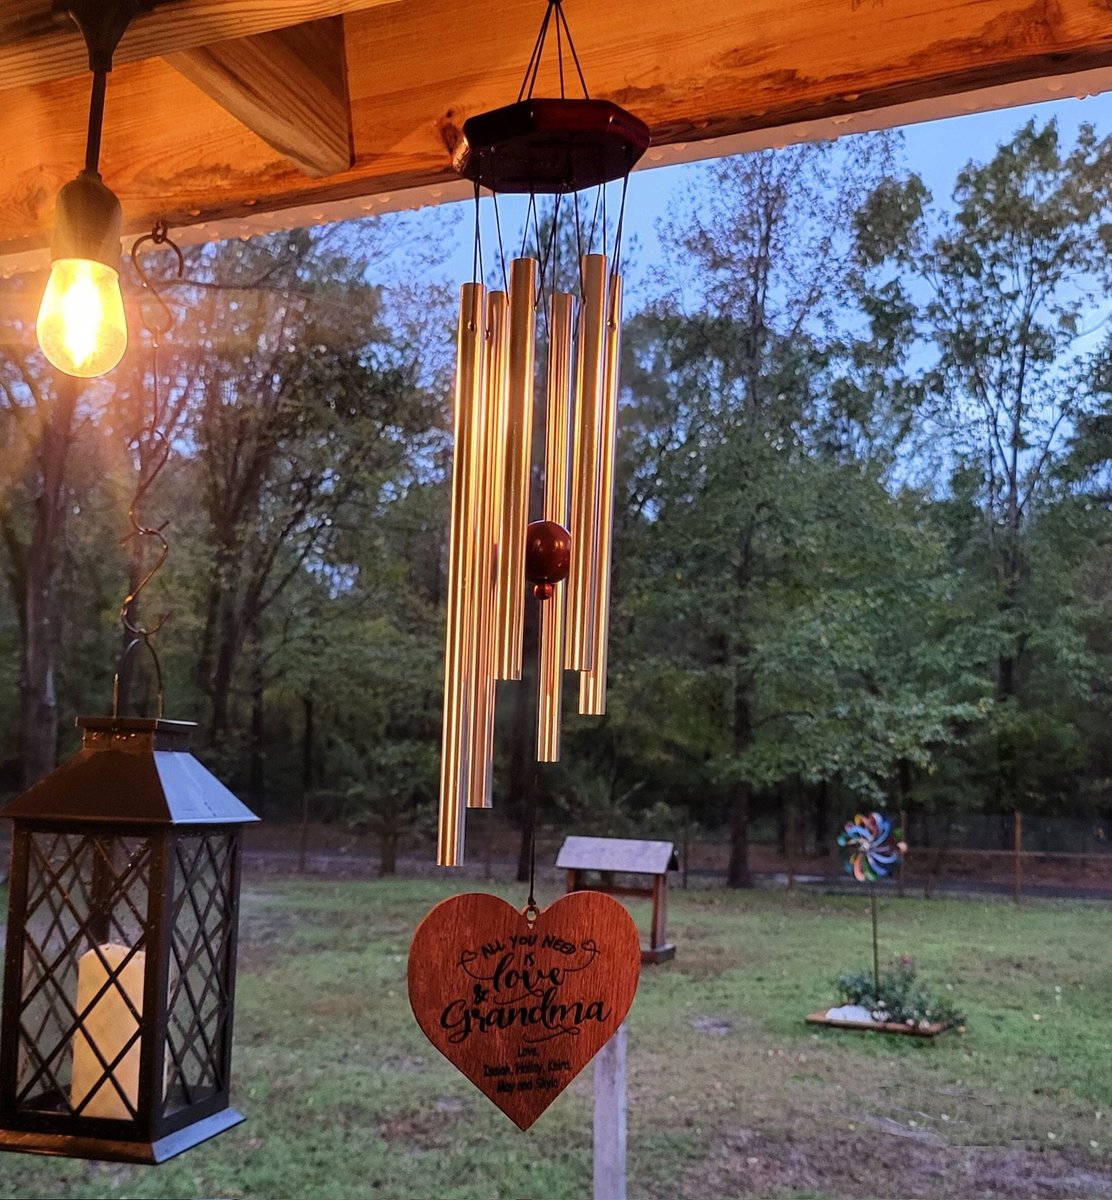 #etsy shop: Personalized wind chimes Gift with custom saying, Wedding gift for her, Gift for Grandma, Mother-in-law Christmas, Outdoor gift, Windchimes #weddinggiftforher #giftforgrandma #motherinlaw #personalizedgift #christmasgifts #motherofbr etsy.me/3PZRmQT